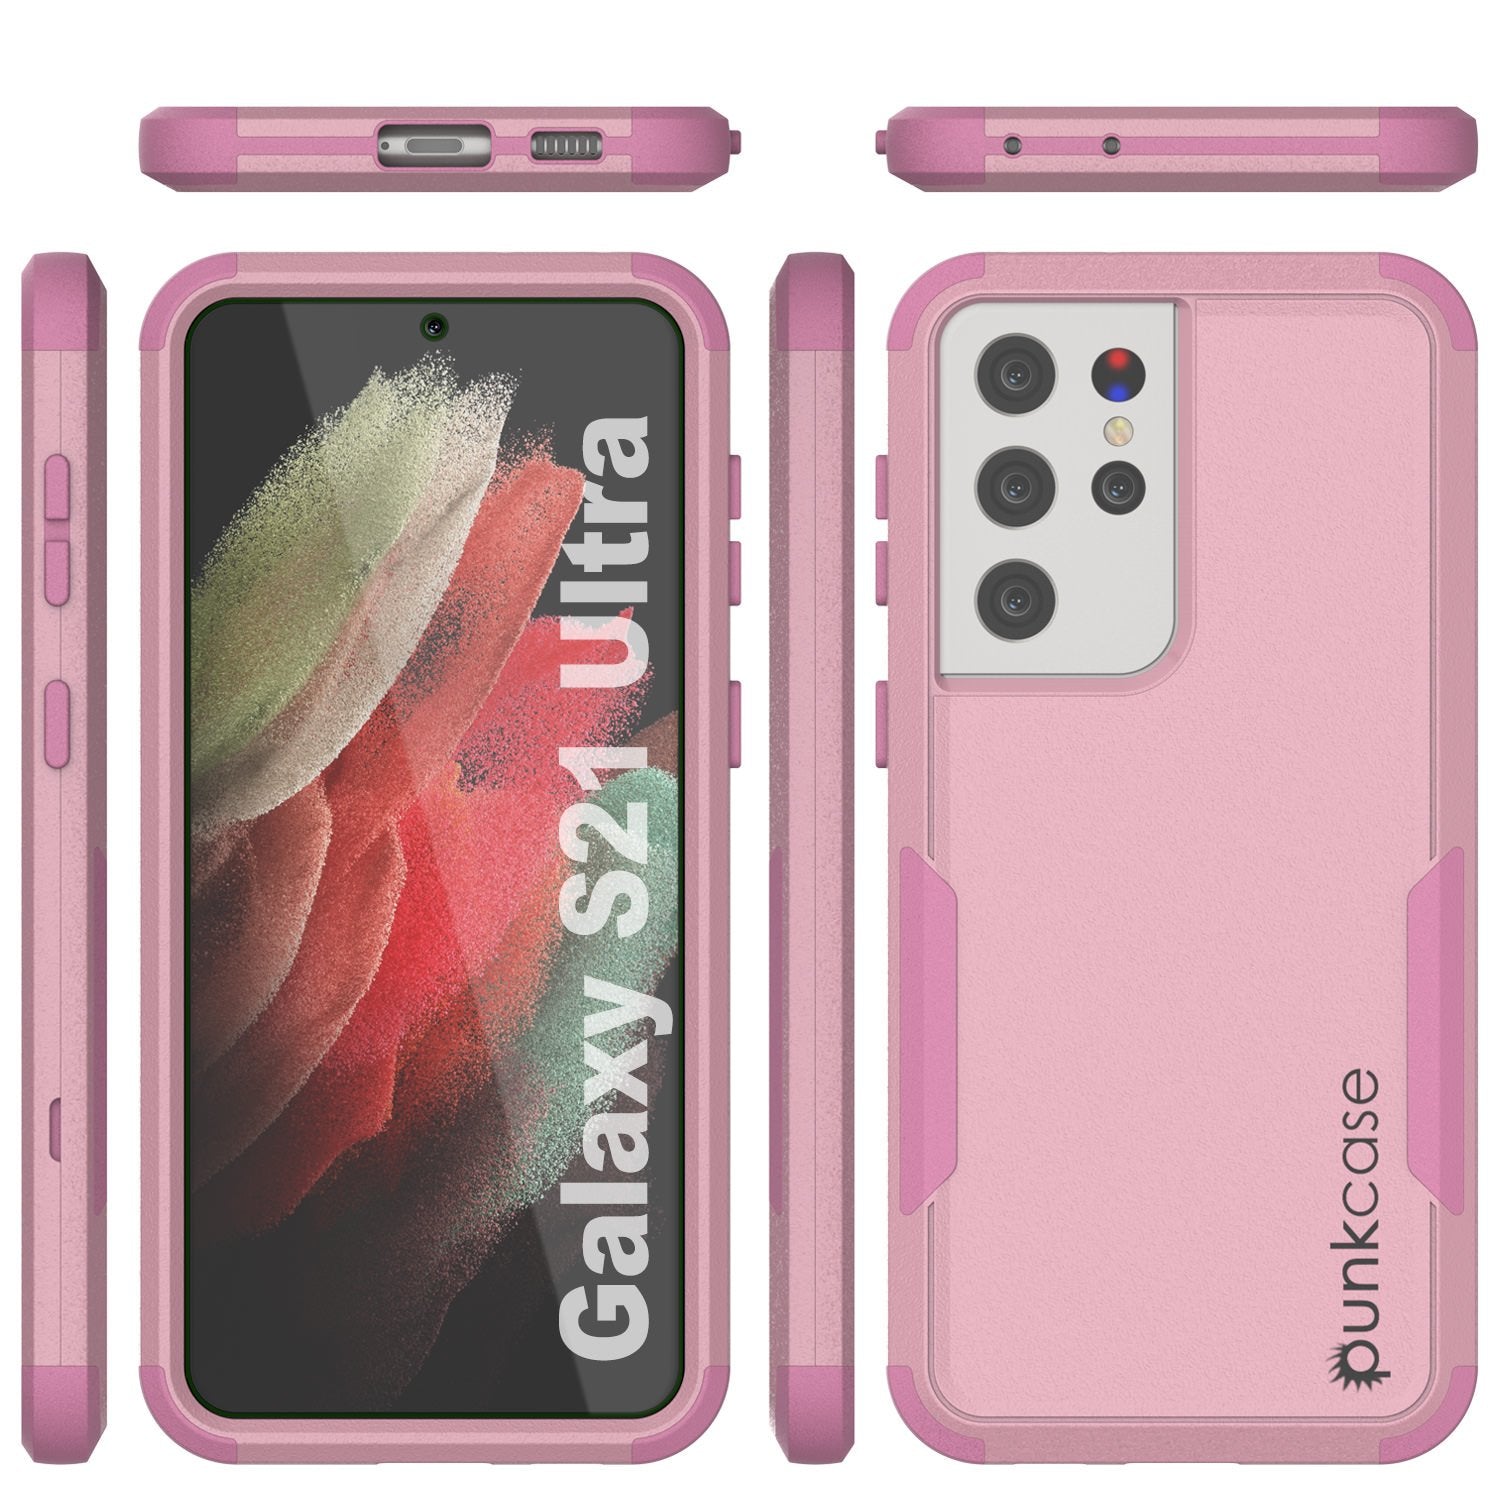 Punkcase for Galaxy S21 Ultra 5G Belt Clip Multilayer Holster Case [Patron Series] [Pink]